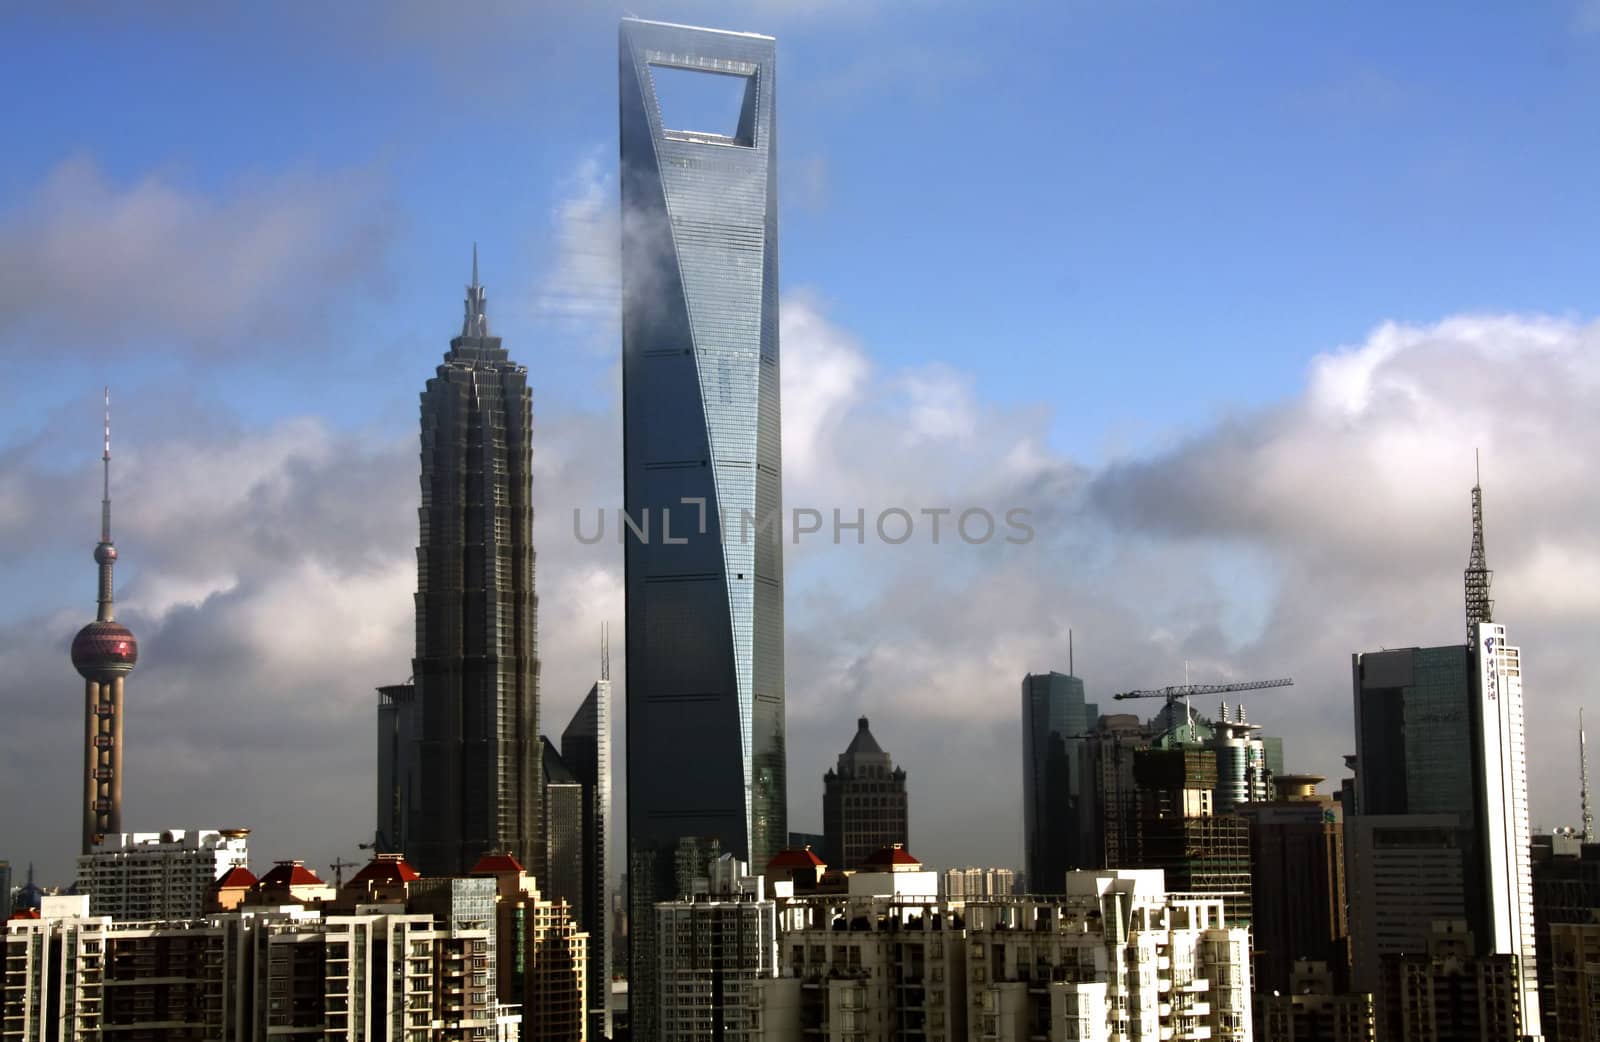 Shanghai's newest tallest buildings in the heart of the financial center